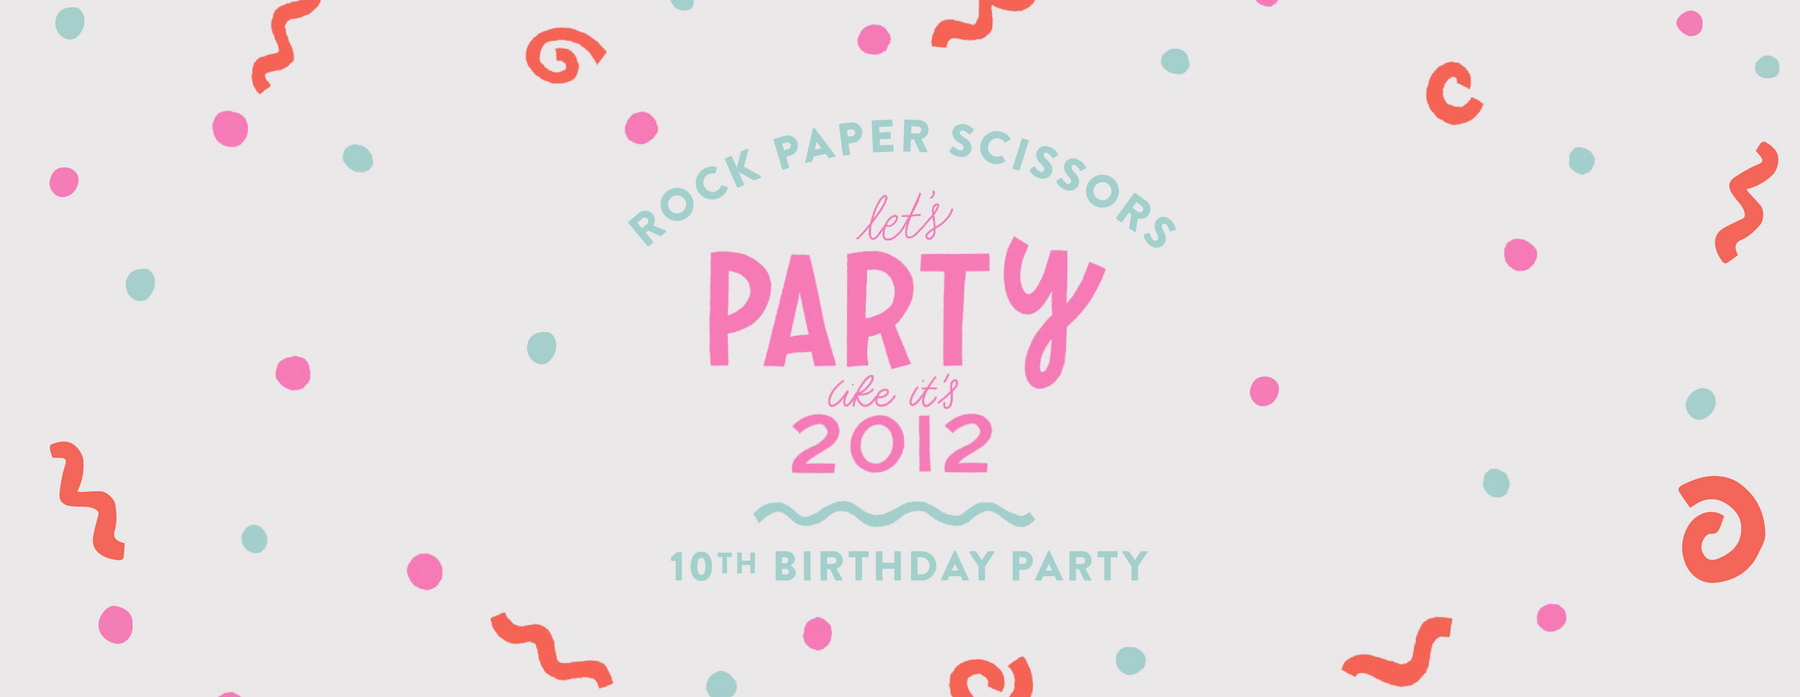 Rock Paper Scissors 10th Birthday Party: Let's Party Like It's 2012!